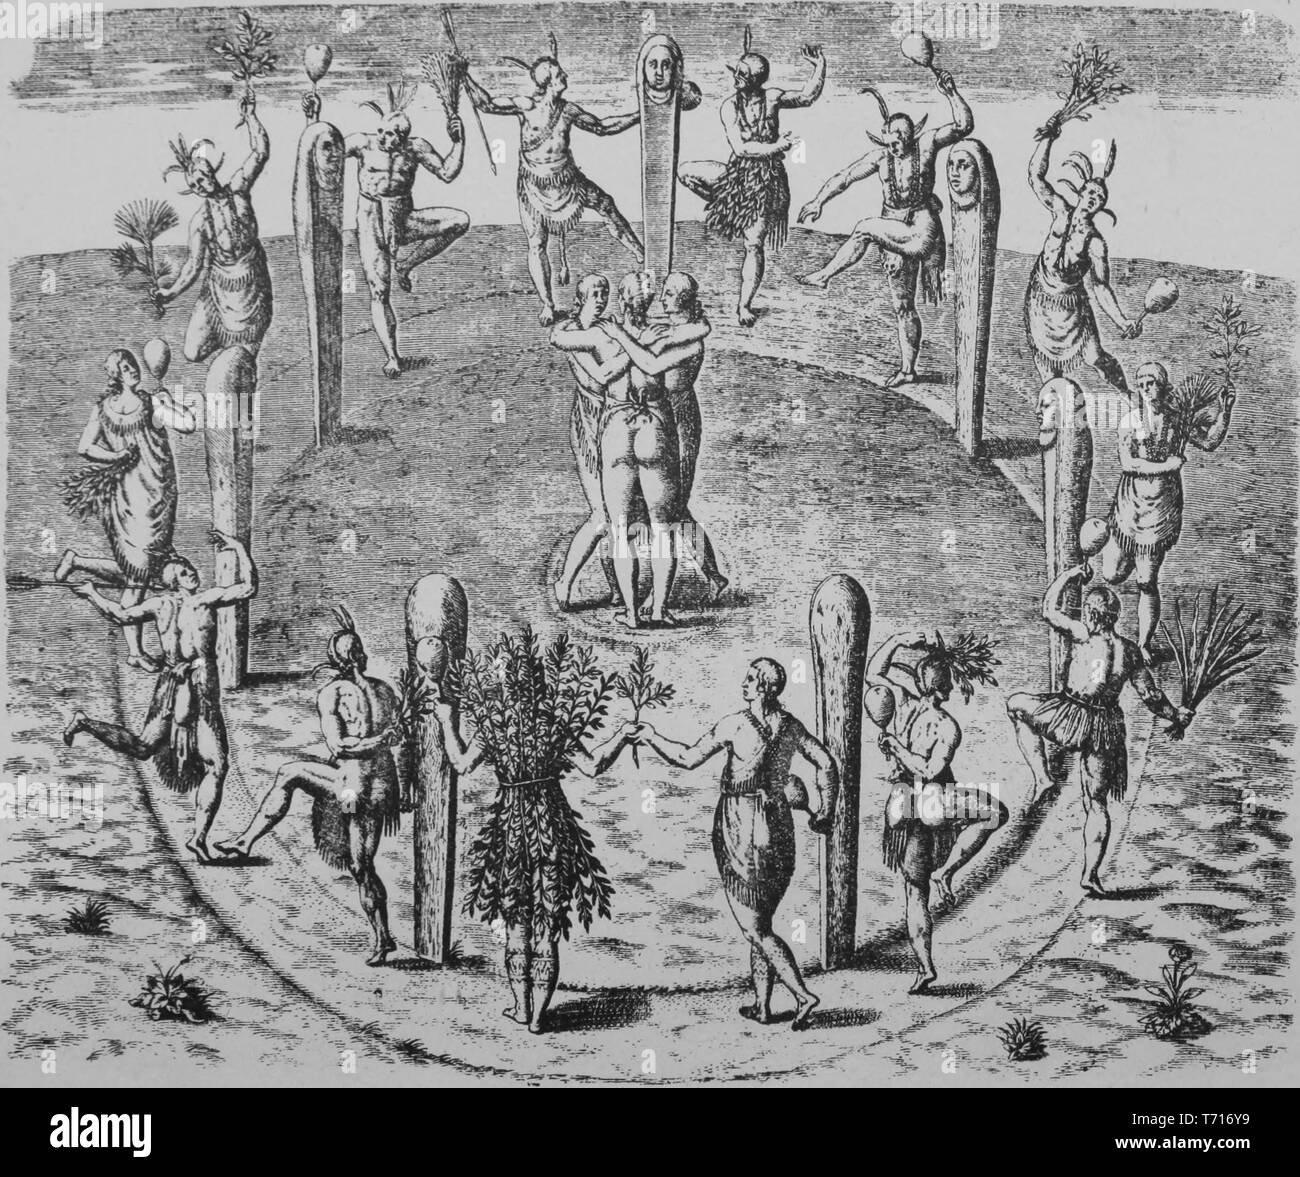 Engraving of local residents dancing among poles with carved human head, three virgins dancing in the middle, from the book 'The Spanish Letter of Columbus to Luis De Sant' Angel' by Christopher Columbus, Bernard Quaritch, and Michael P. Kerney, 1893. Courtesy Internet Archive. () Stock Photo